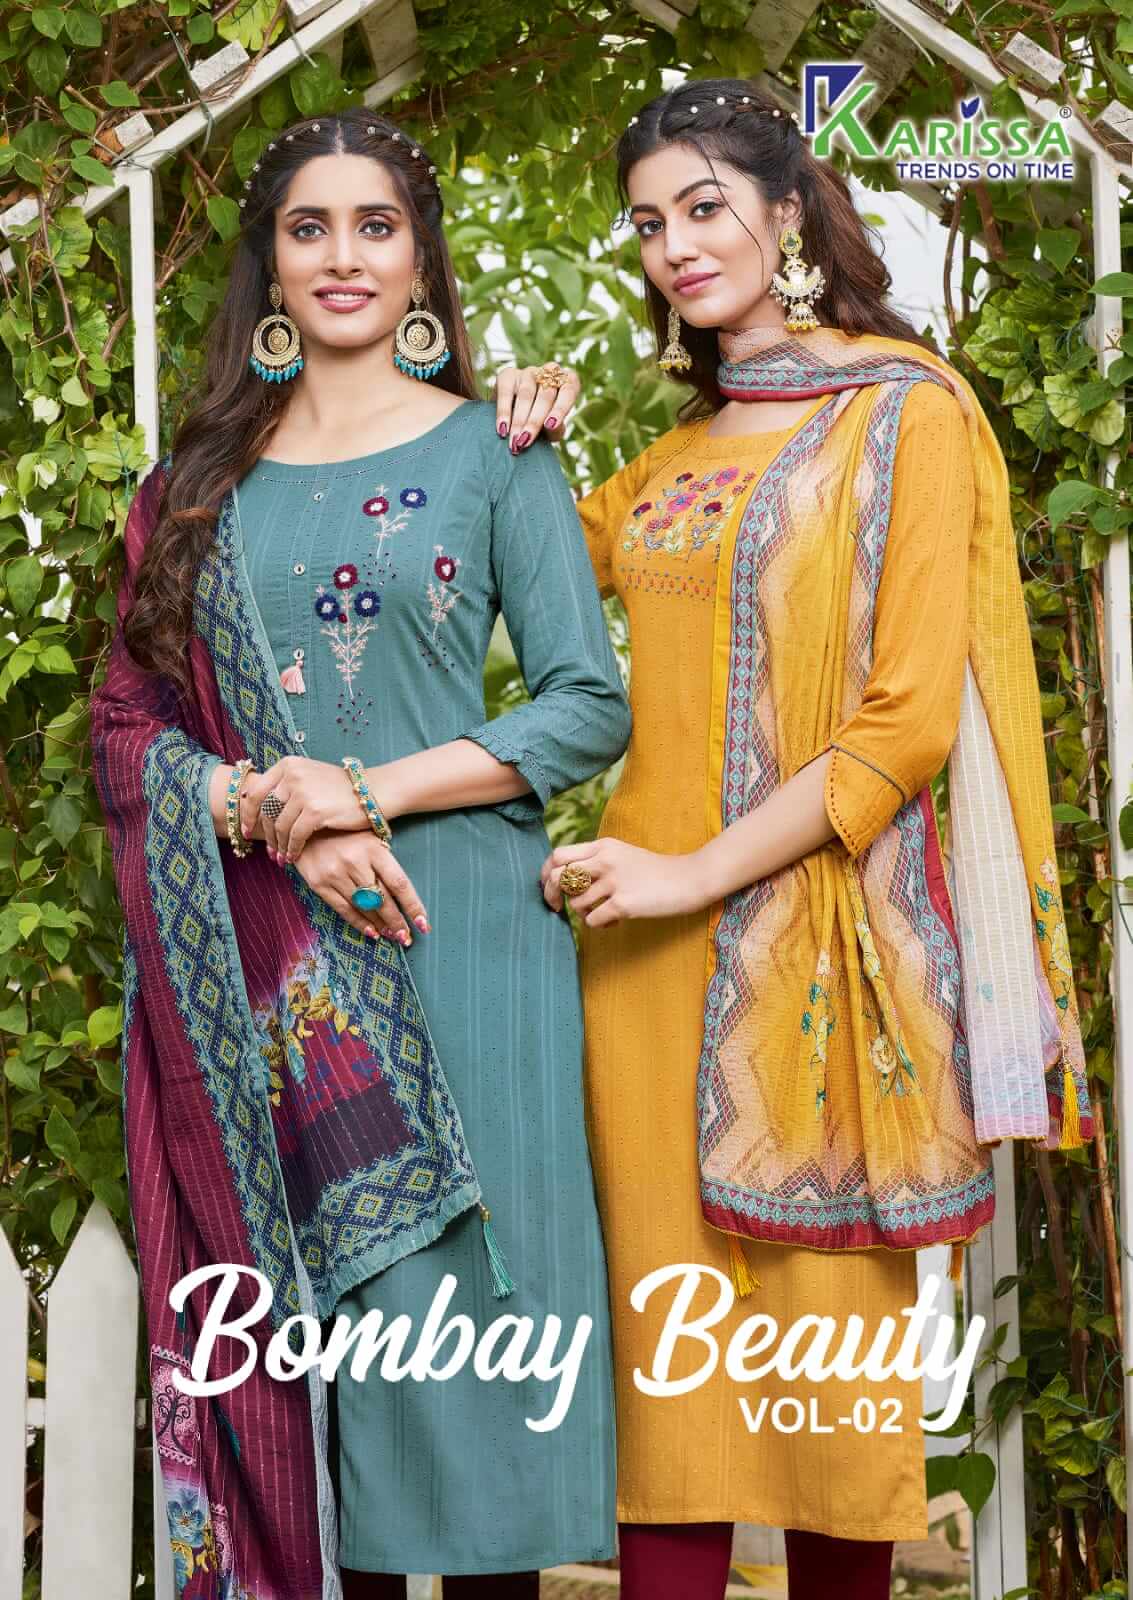 Karissa Bombay Beauty Vol 2 Party Wear Dress Wholesale Catalog. Purchase Full Catalog of Party Wear Dress in Wholesale Price Online